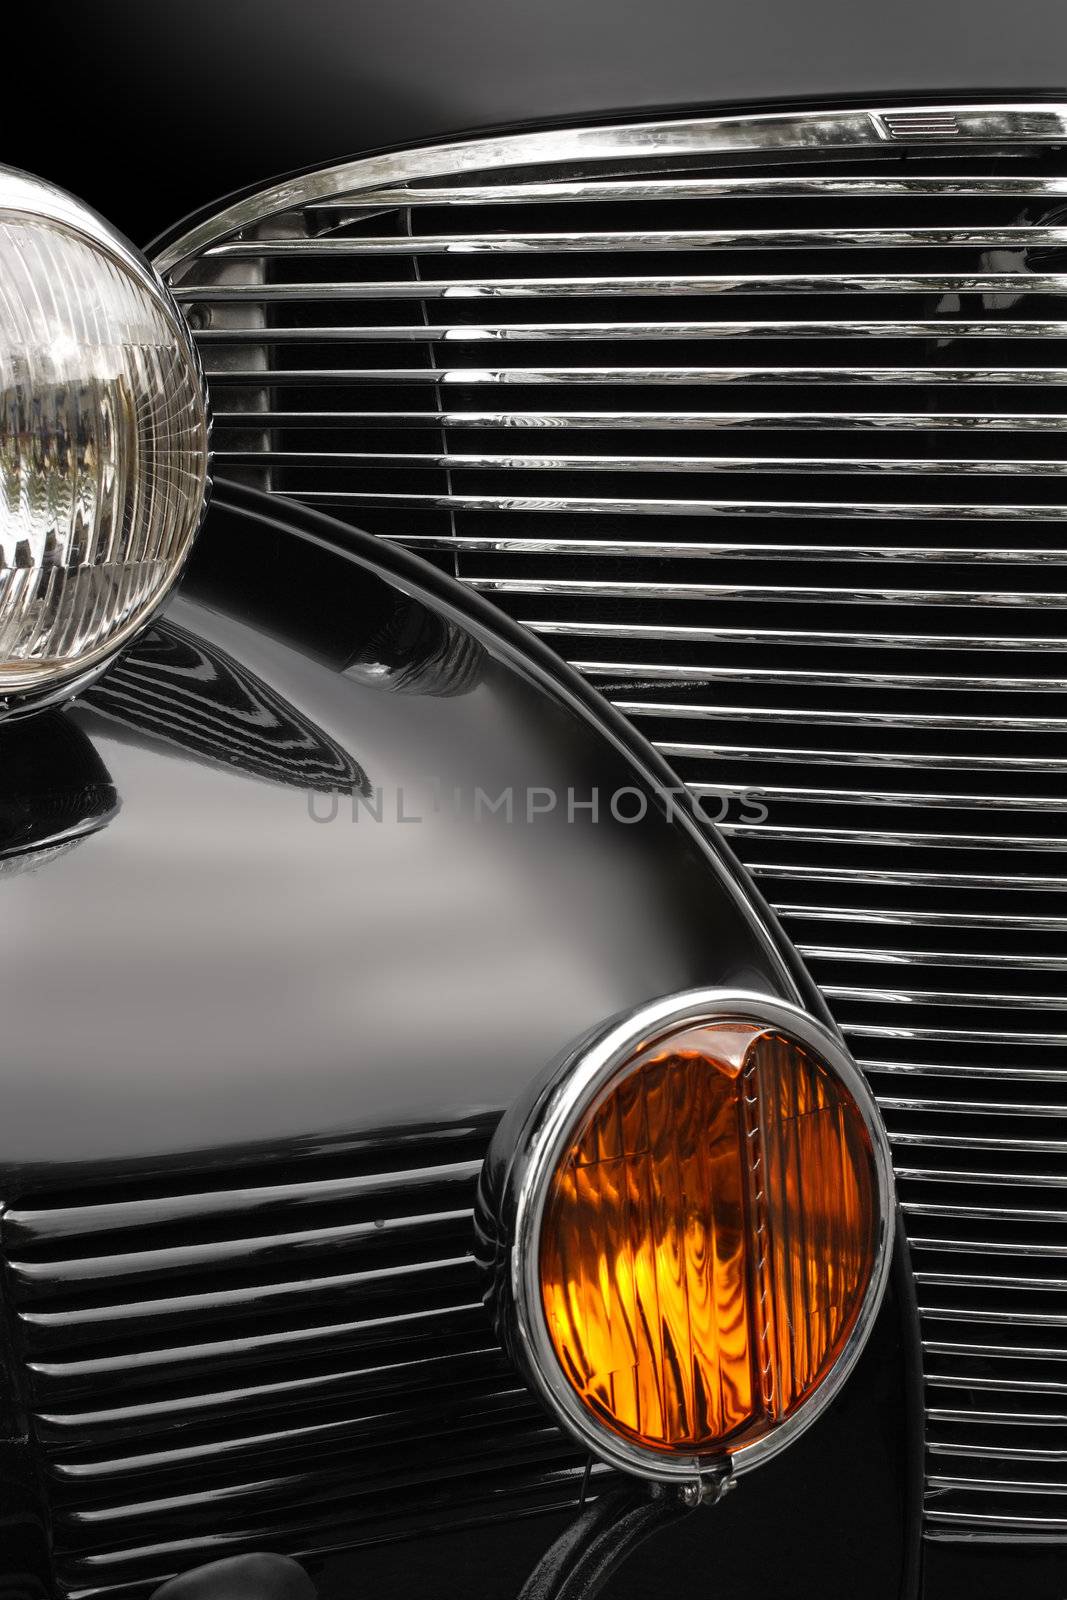 The chrome grill and headlights of an antique classic car.